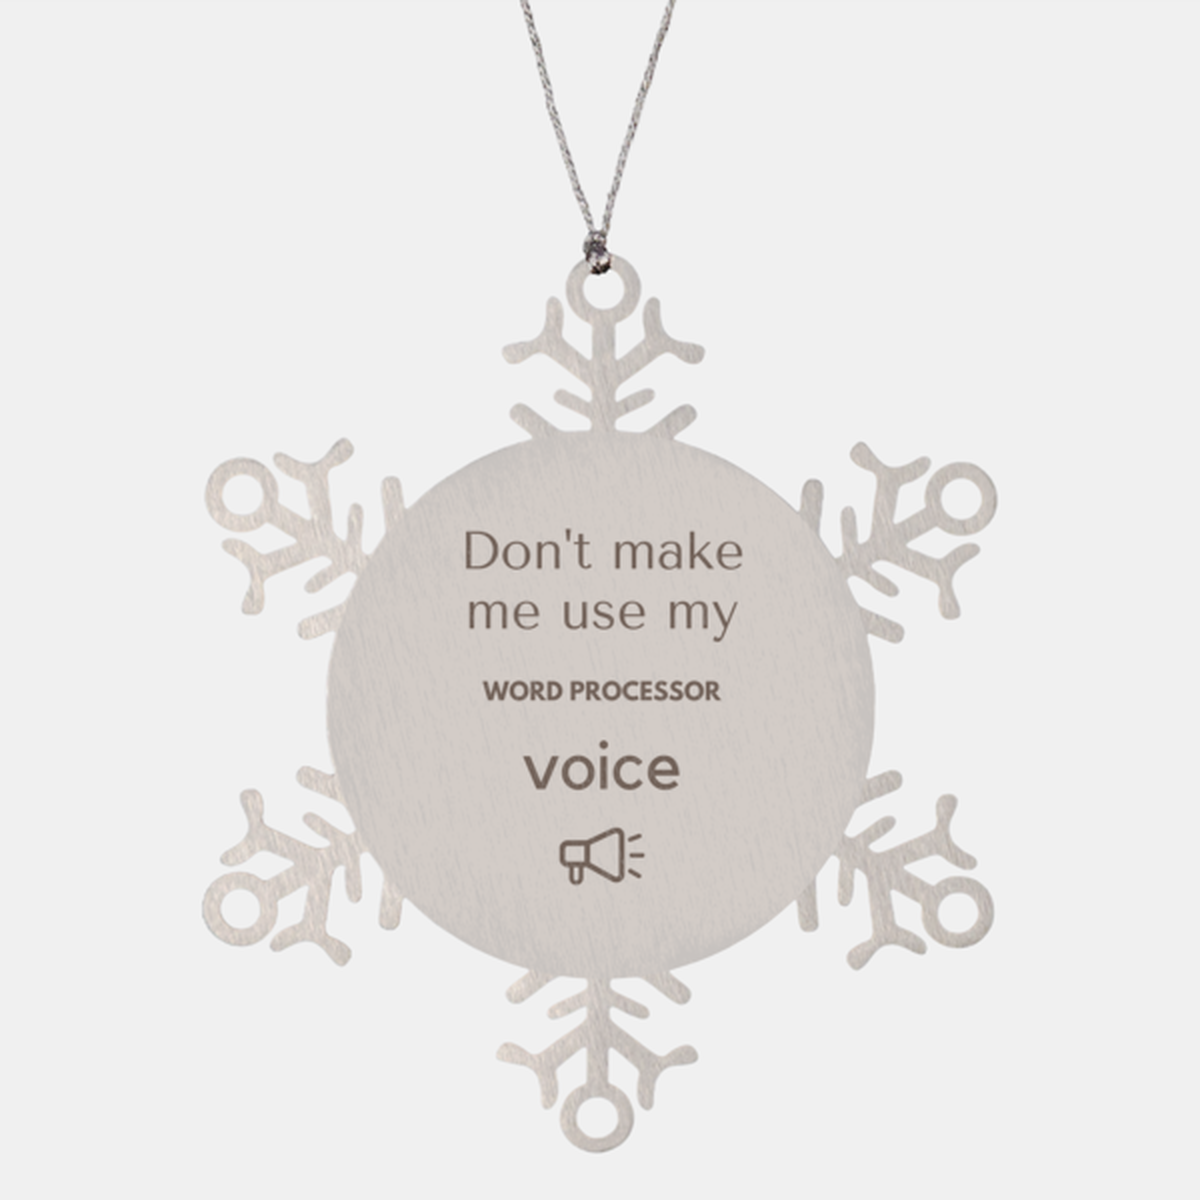 Don't make me use my Word Processor voice, Sarcasm Word Processor Ornament Gifts, Christmas Word Processor Snowflake Ornament Unique Gifts For Word Processor Coworkers, Men, Women, Colleague, Friends